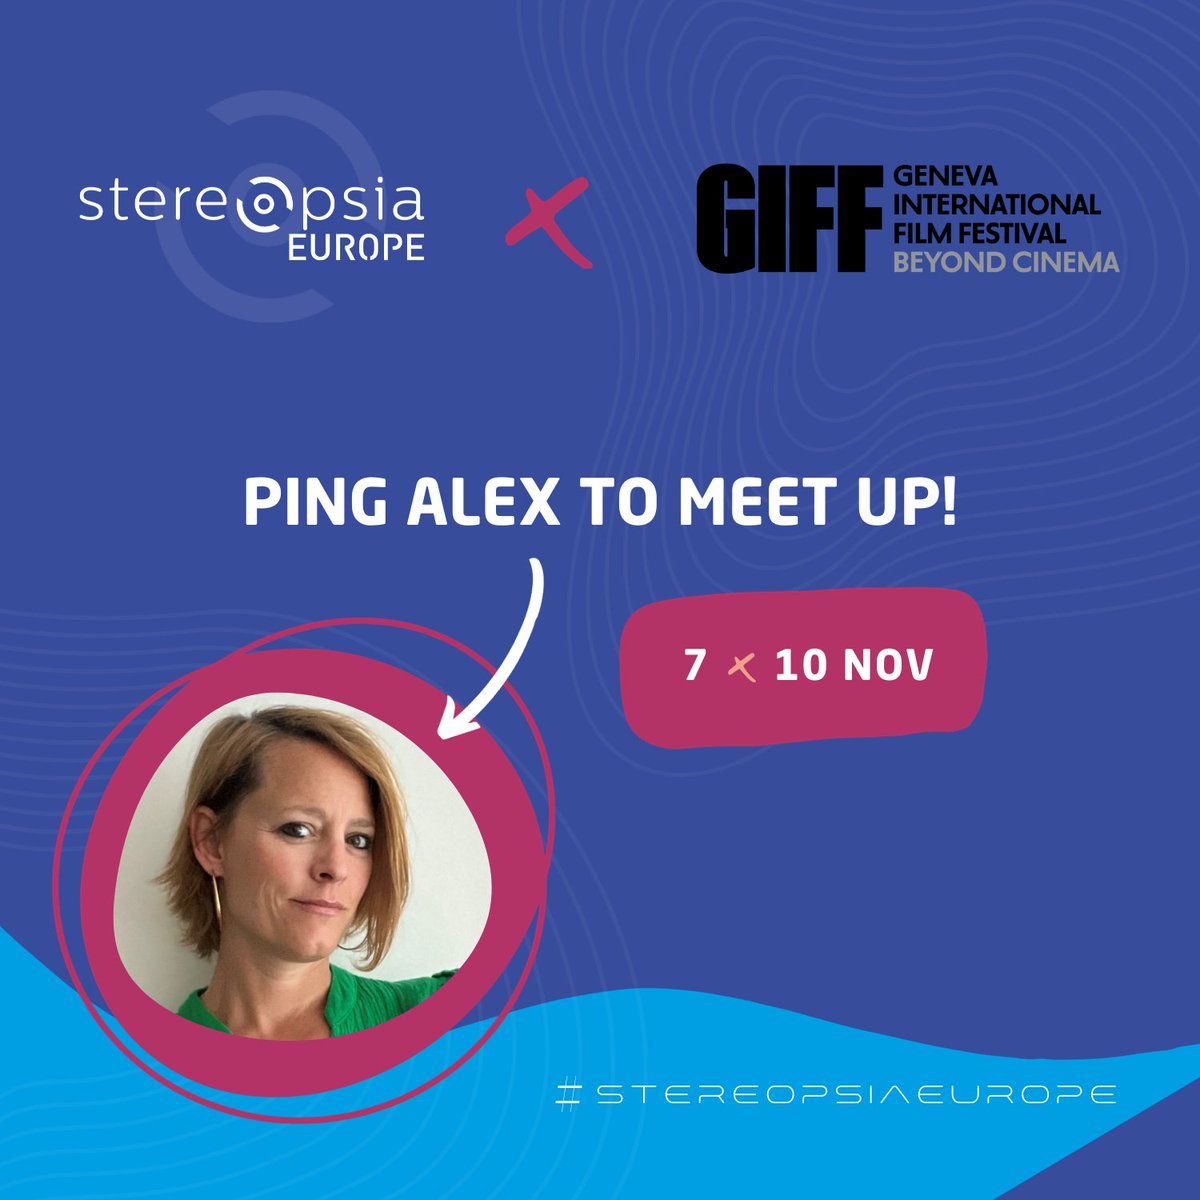 🔜@GIFF_ch
Our Managing Director @alex_stereopsia will be attending @GIFF_ch next week!  

Ping her if you want to meet up!  

#giff #vr #xrcommunity #xrcrowd #filmfestival #xrevent #stereopsia